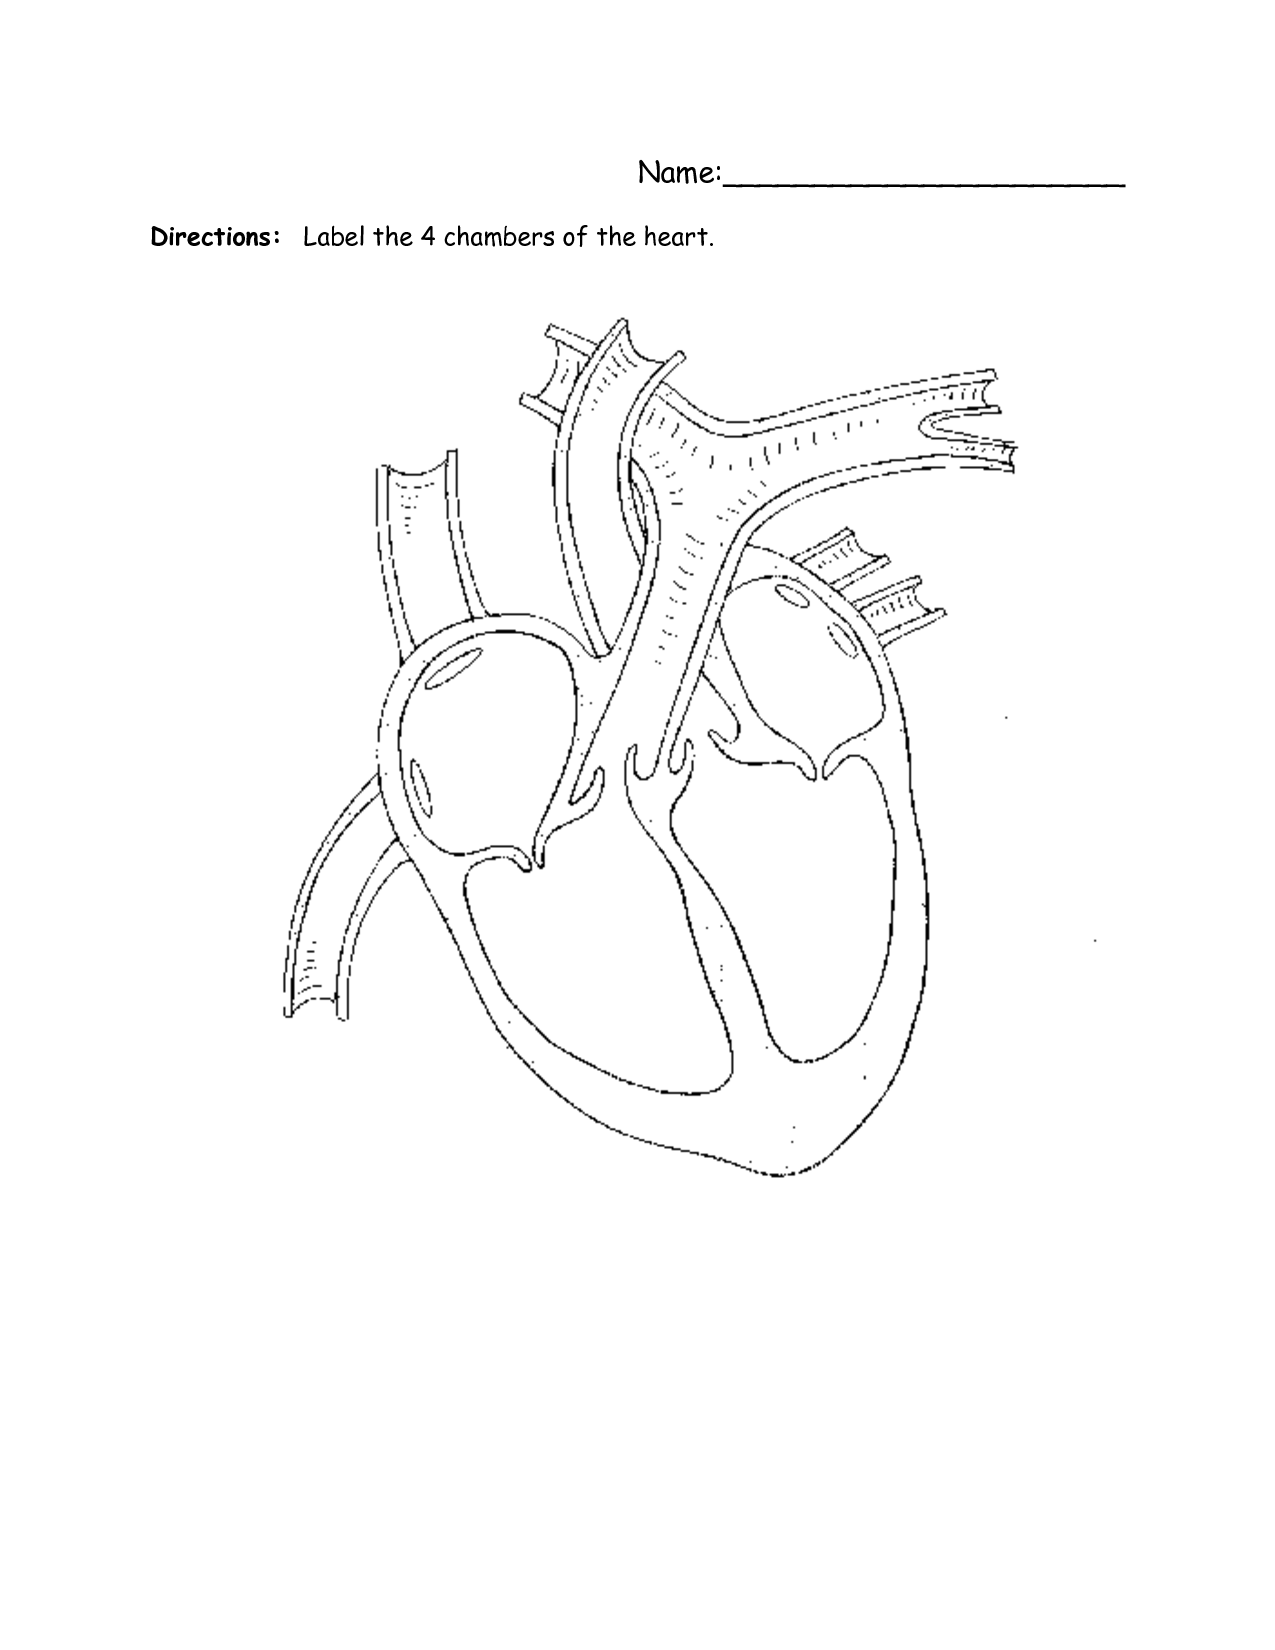 15 Best Images of Structure Of The Heart Worksheet - 4 ...